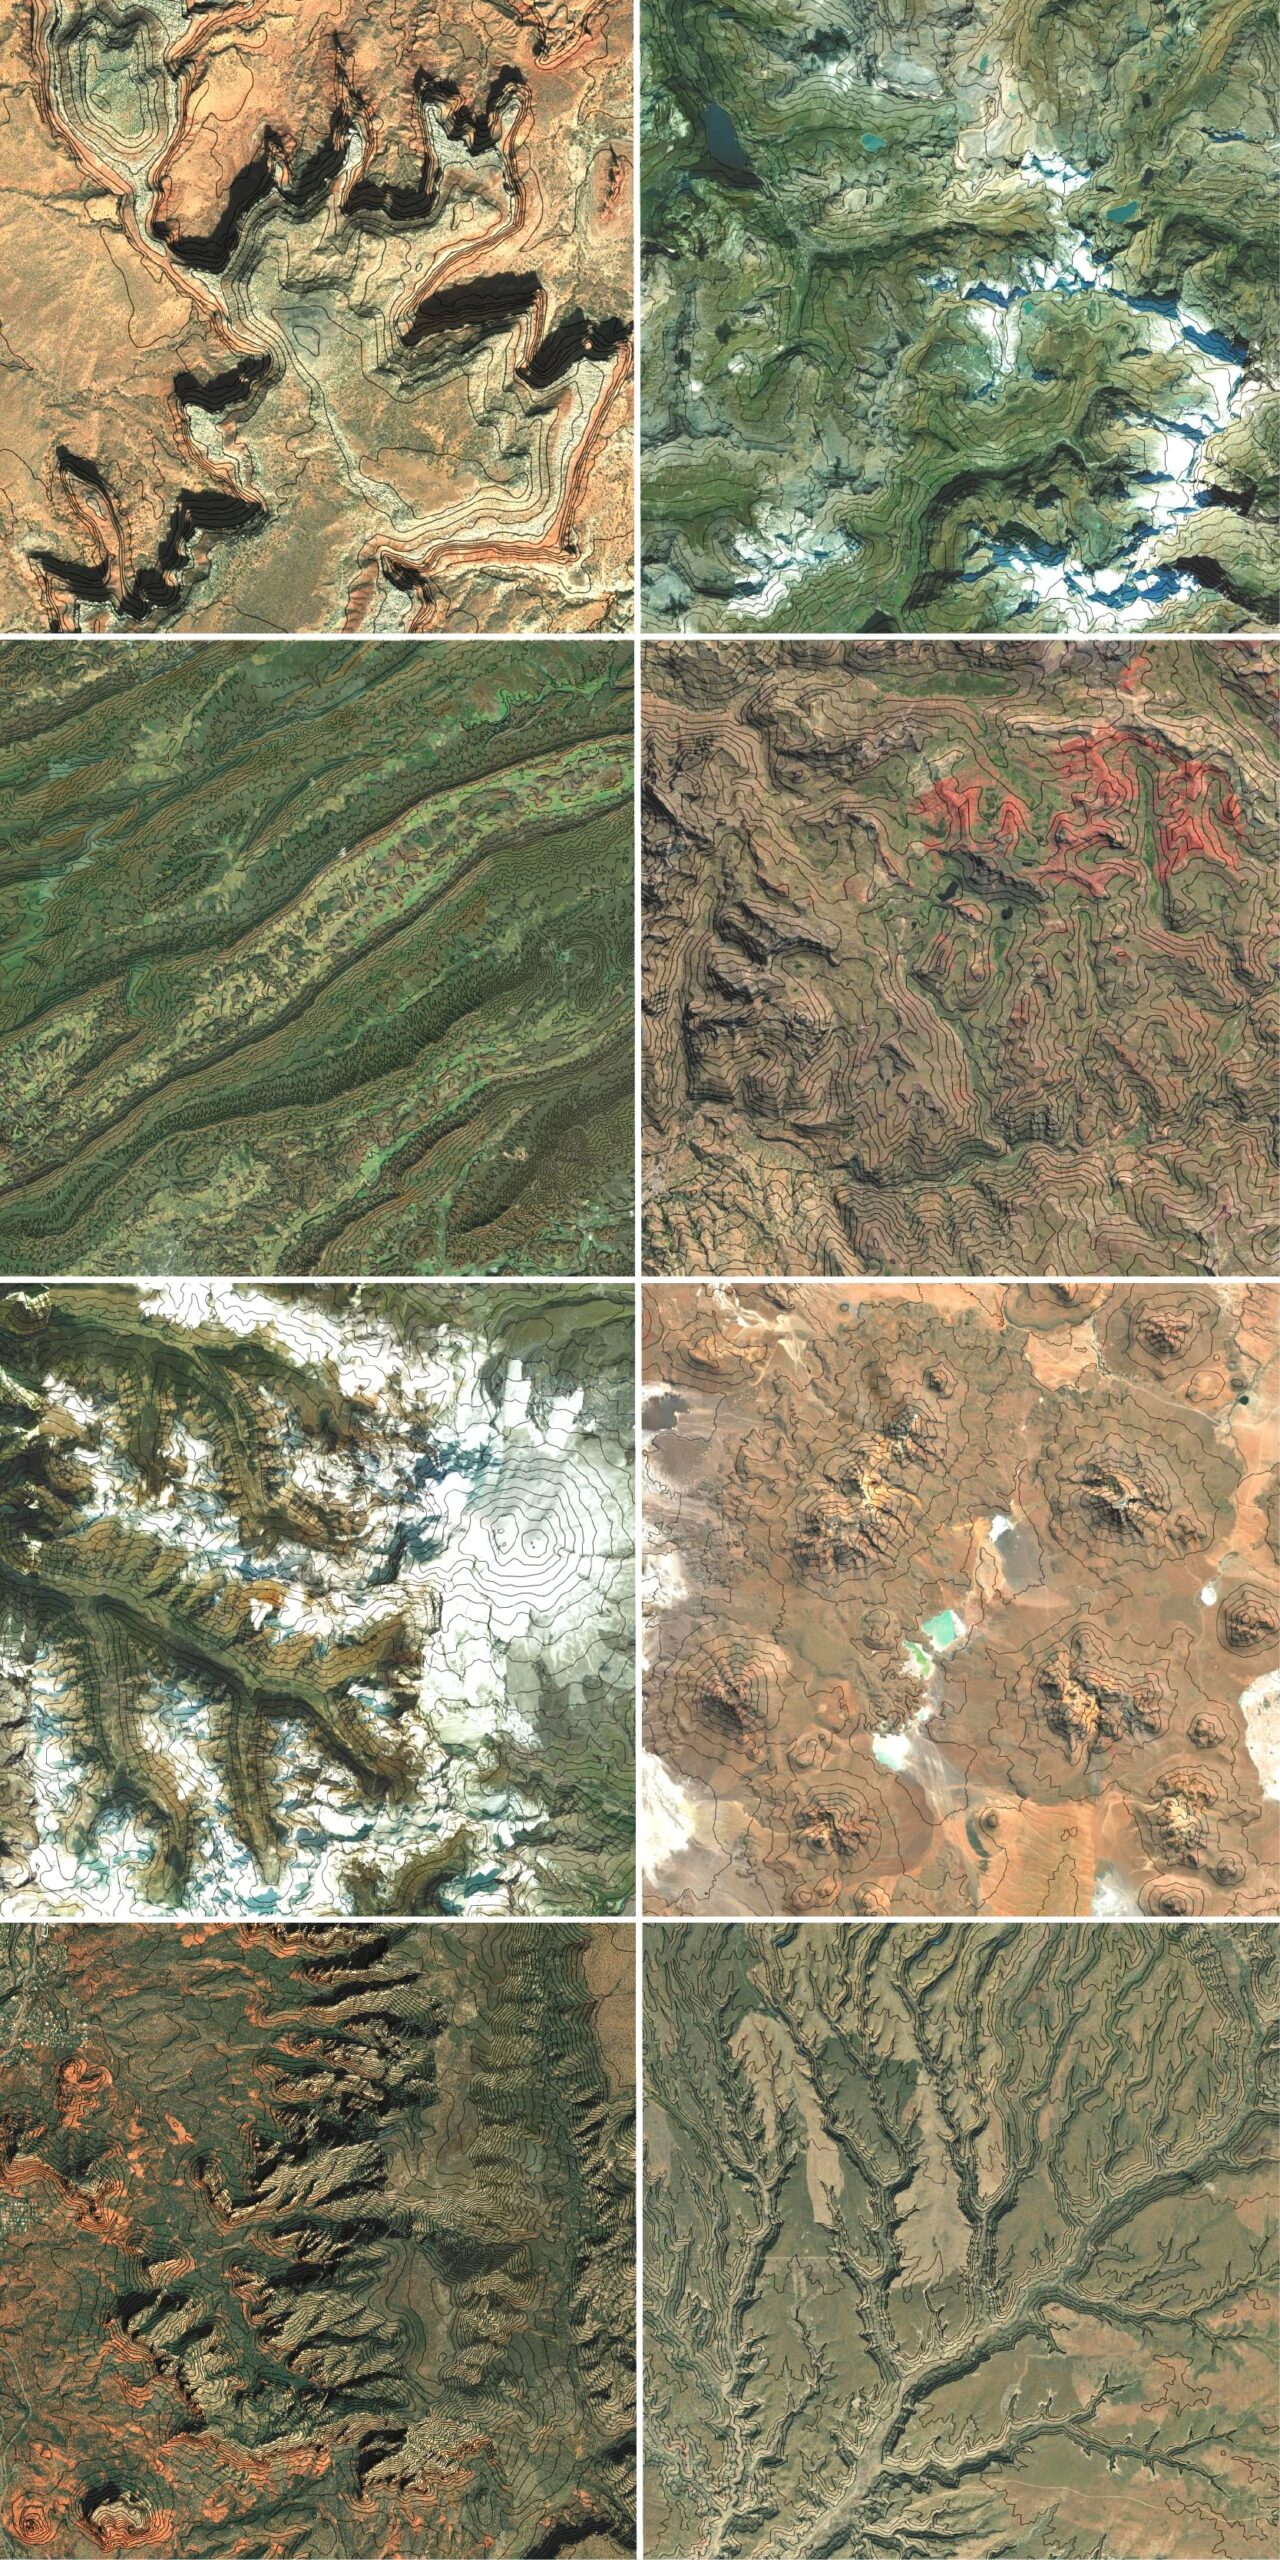 Eight maps showing before and after images of World Imagery with Global Contours.